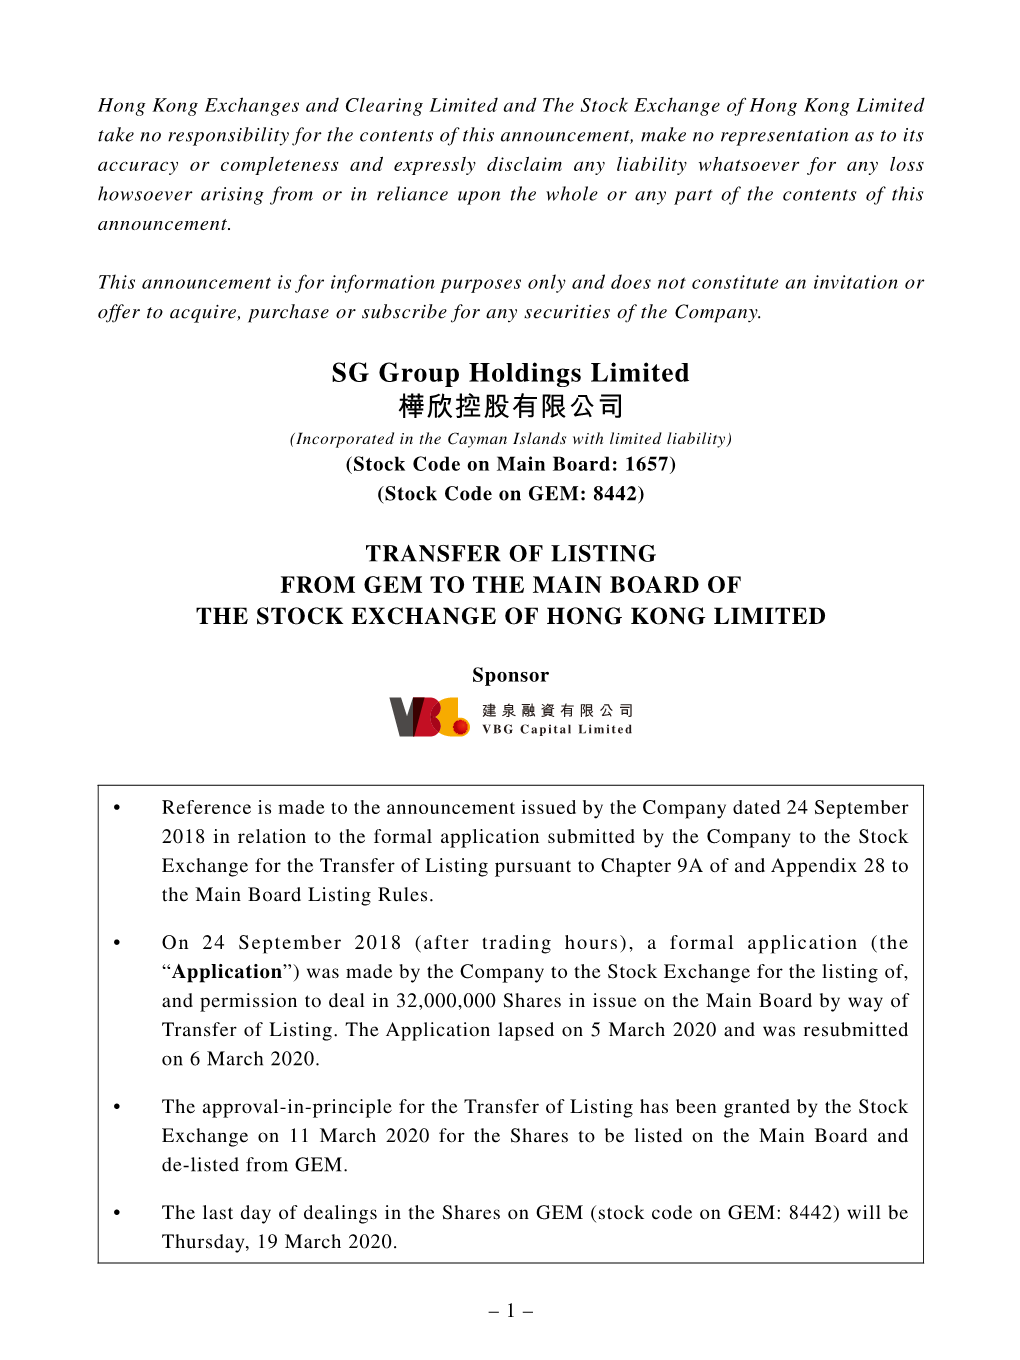 SG Group Holdings Limited 樺欣控股有限公司 (Incorporated in the Cayman Islands with Limited Liability) (Stock Code on Main Board: 1657) (Stock Code on GEM: 8442)